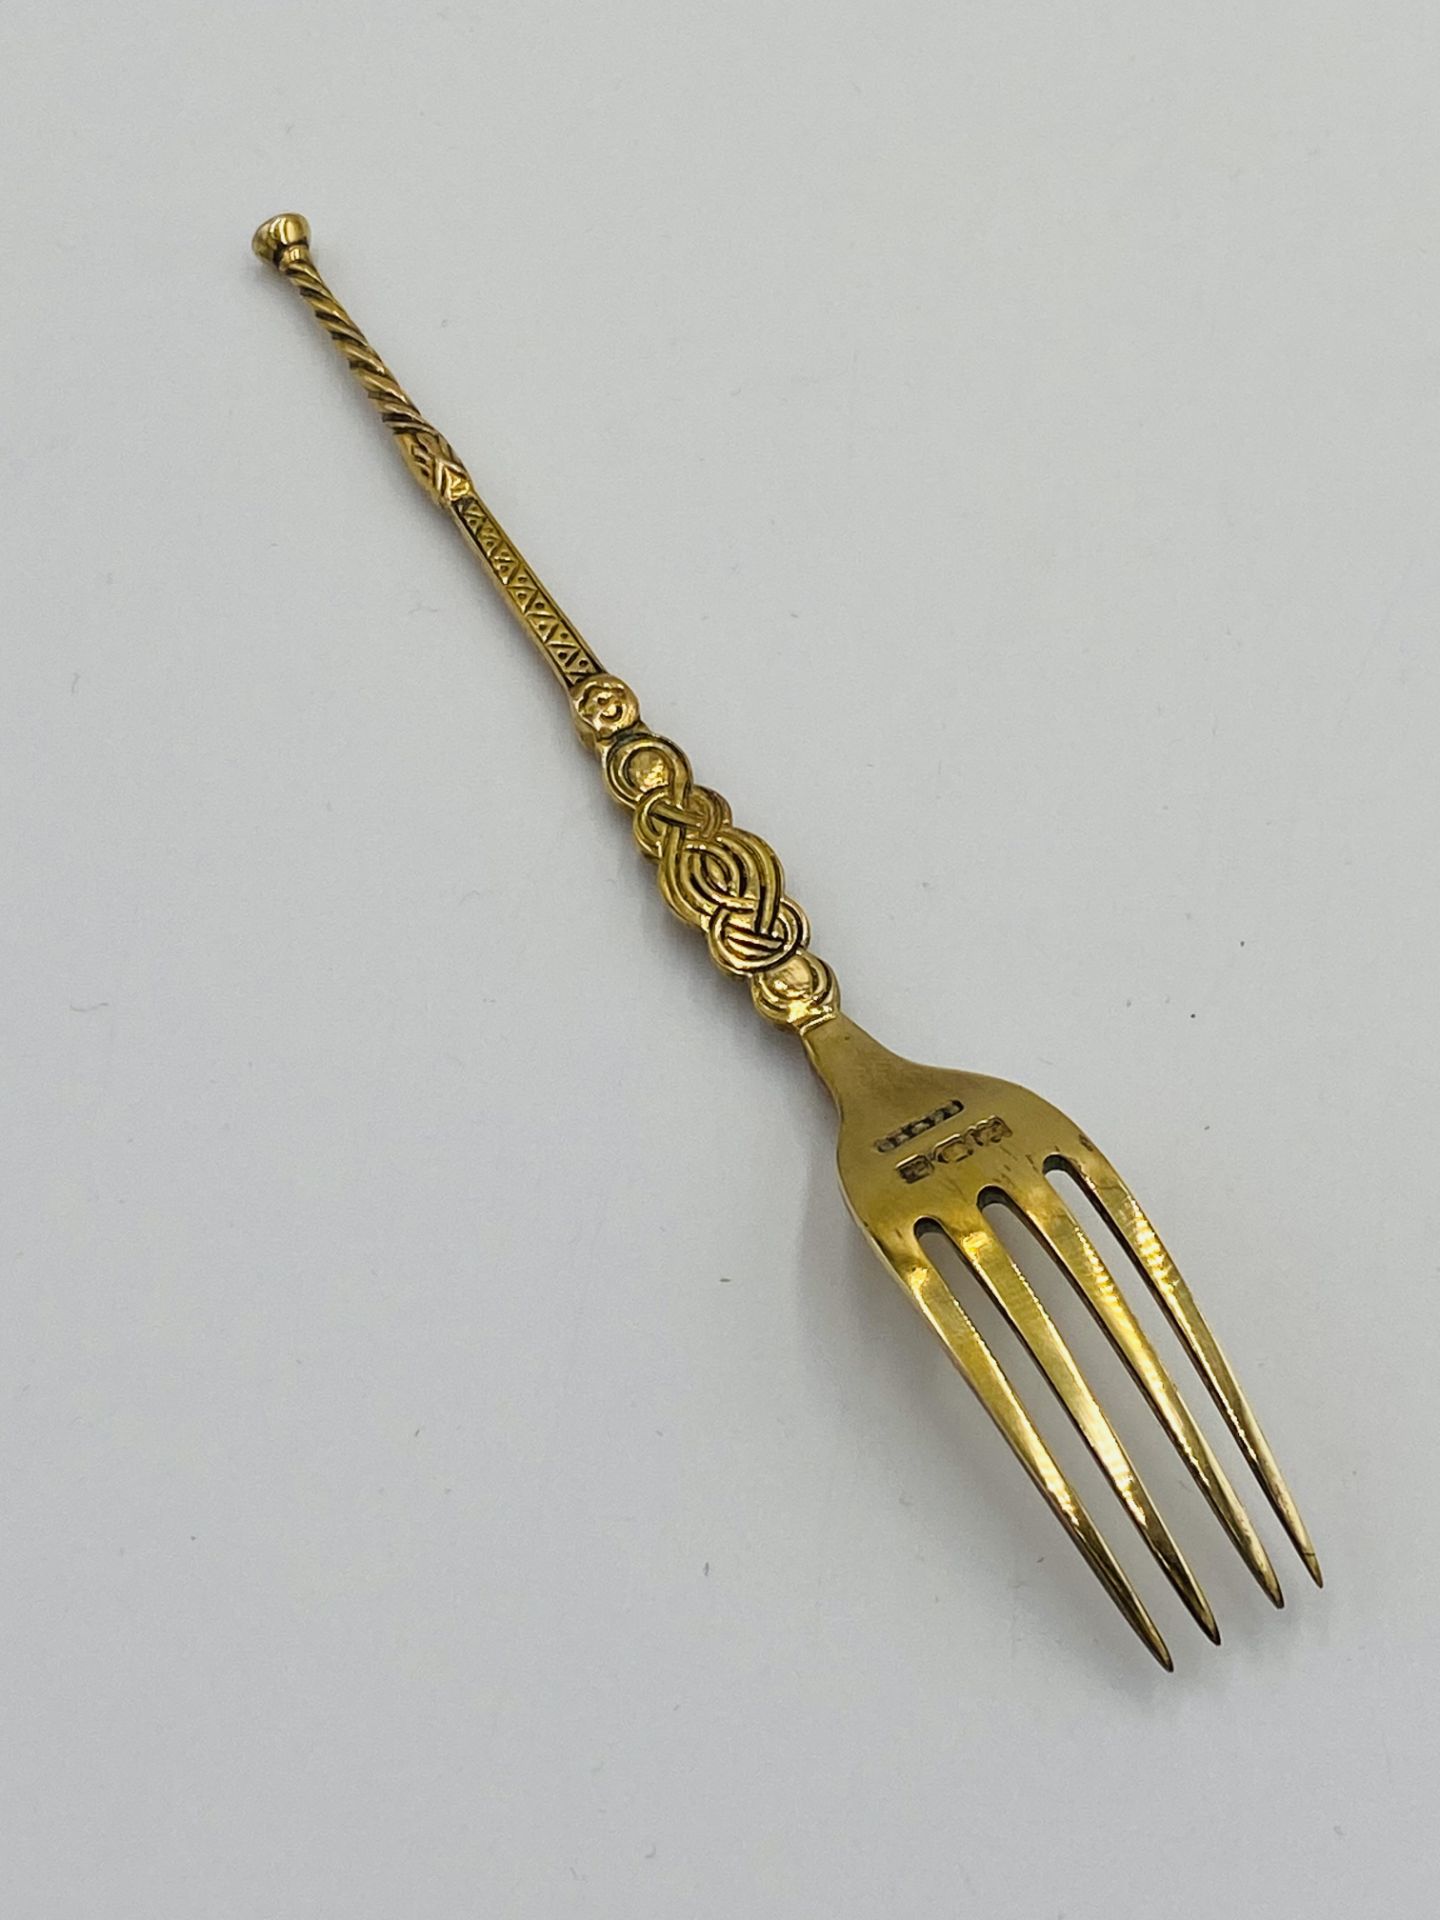 Silver gilt anointing set in box - Image 7 of 7